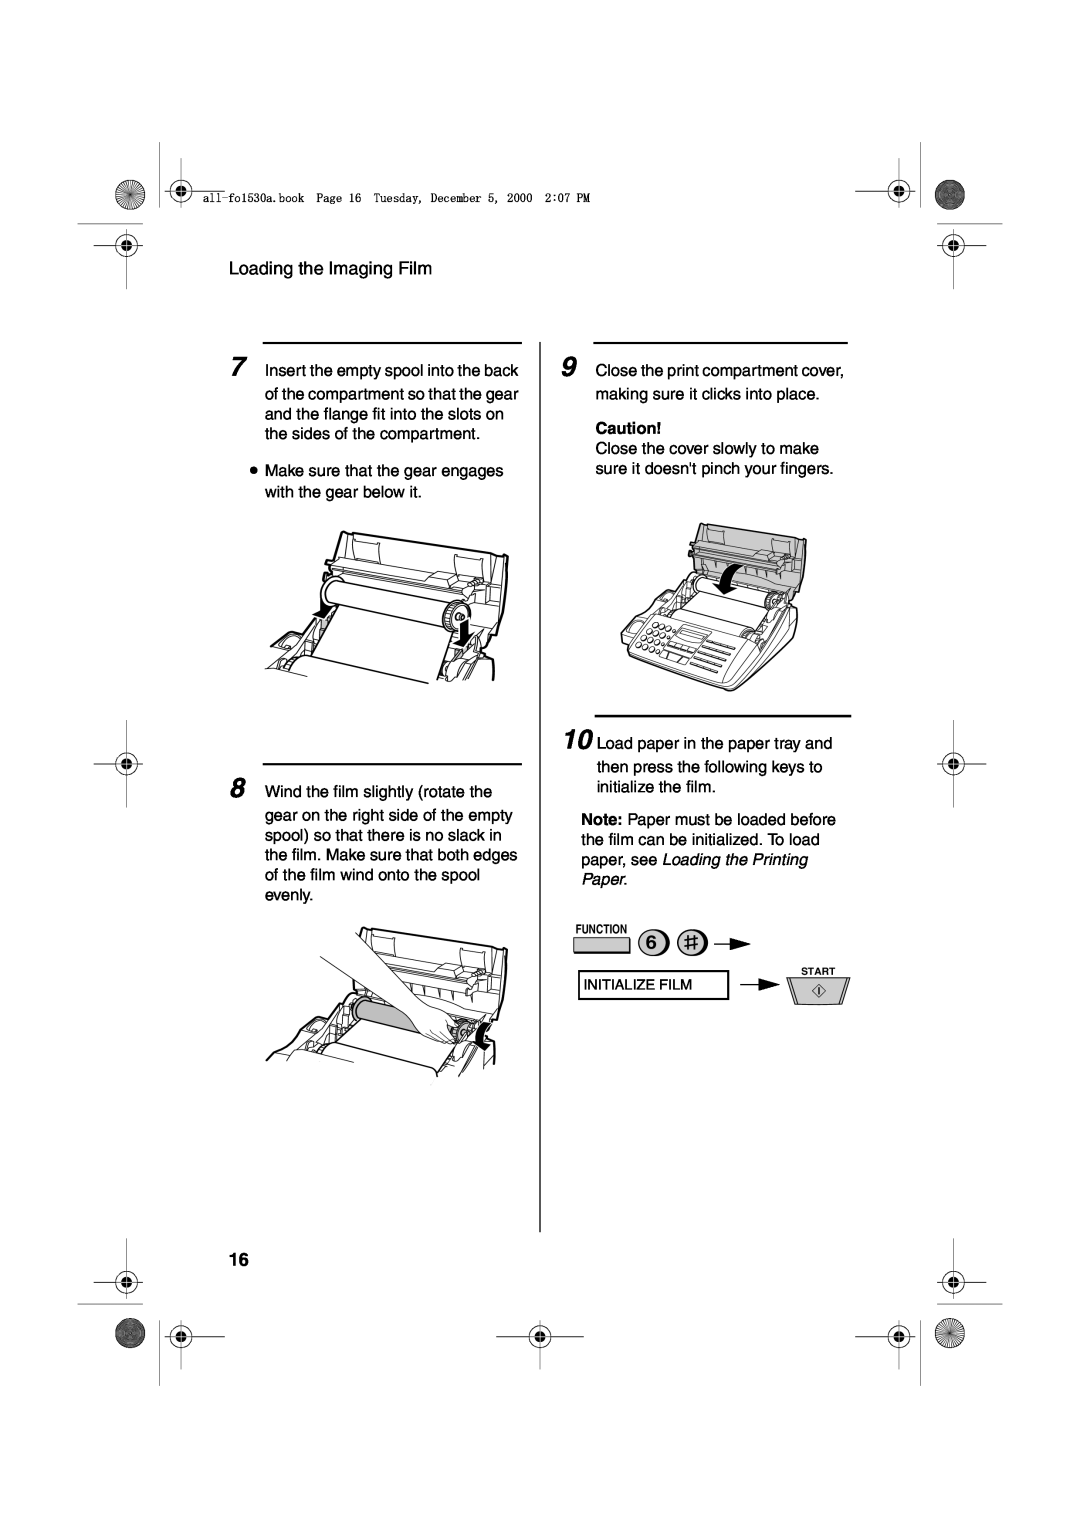 Sharp FO-1530 operation manual Make sure that the gear engages with the gear below it 